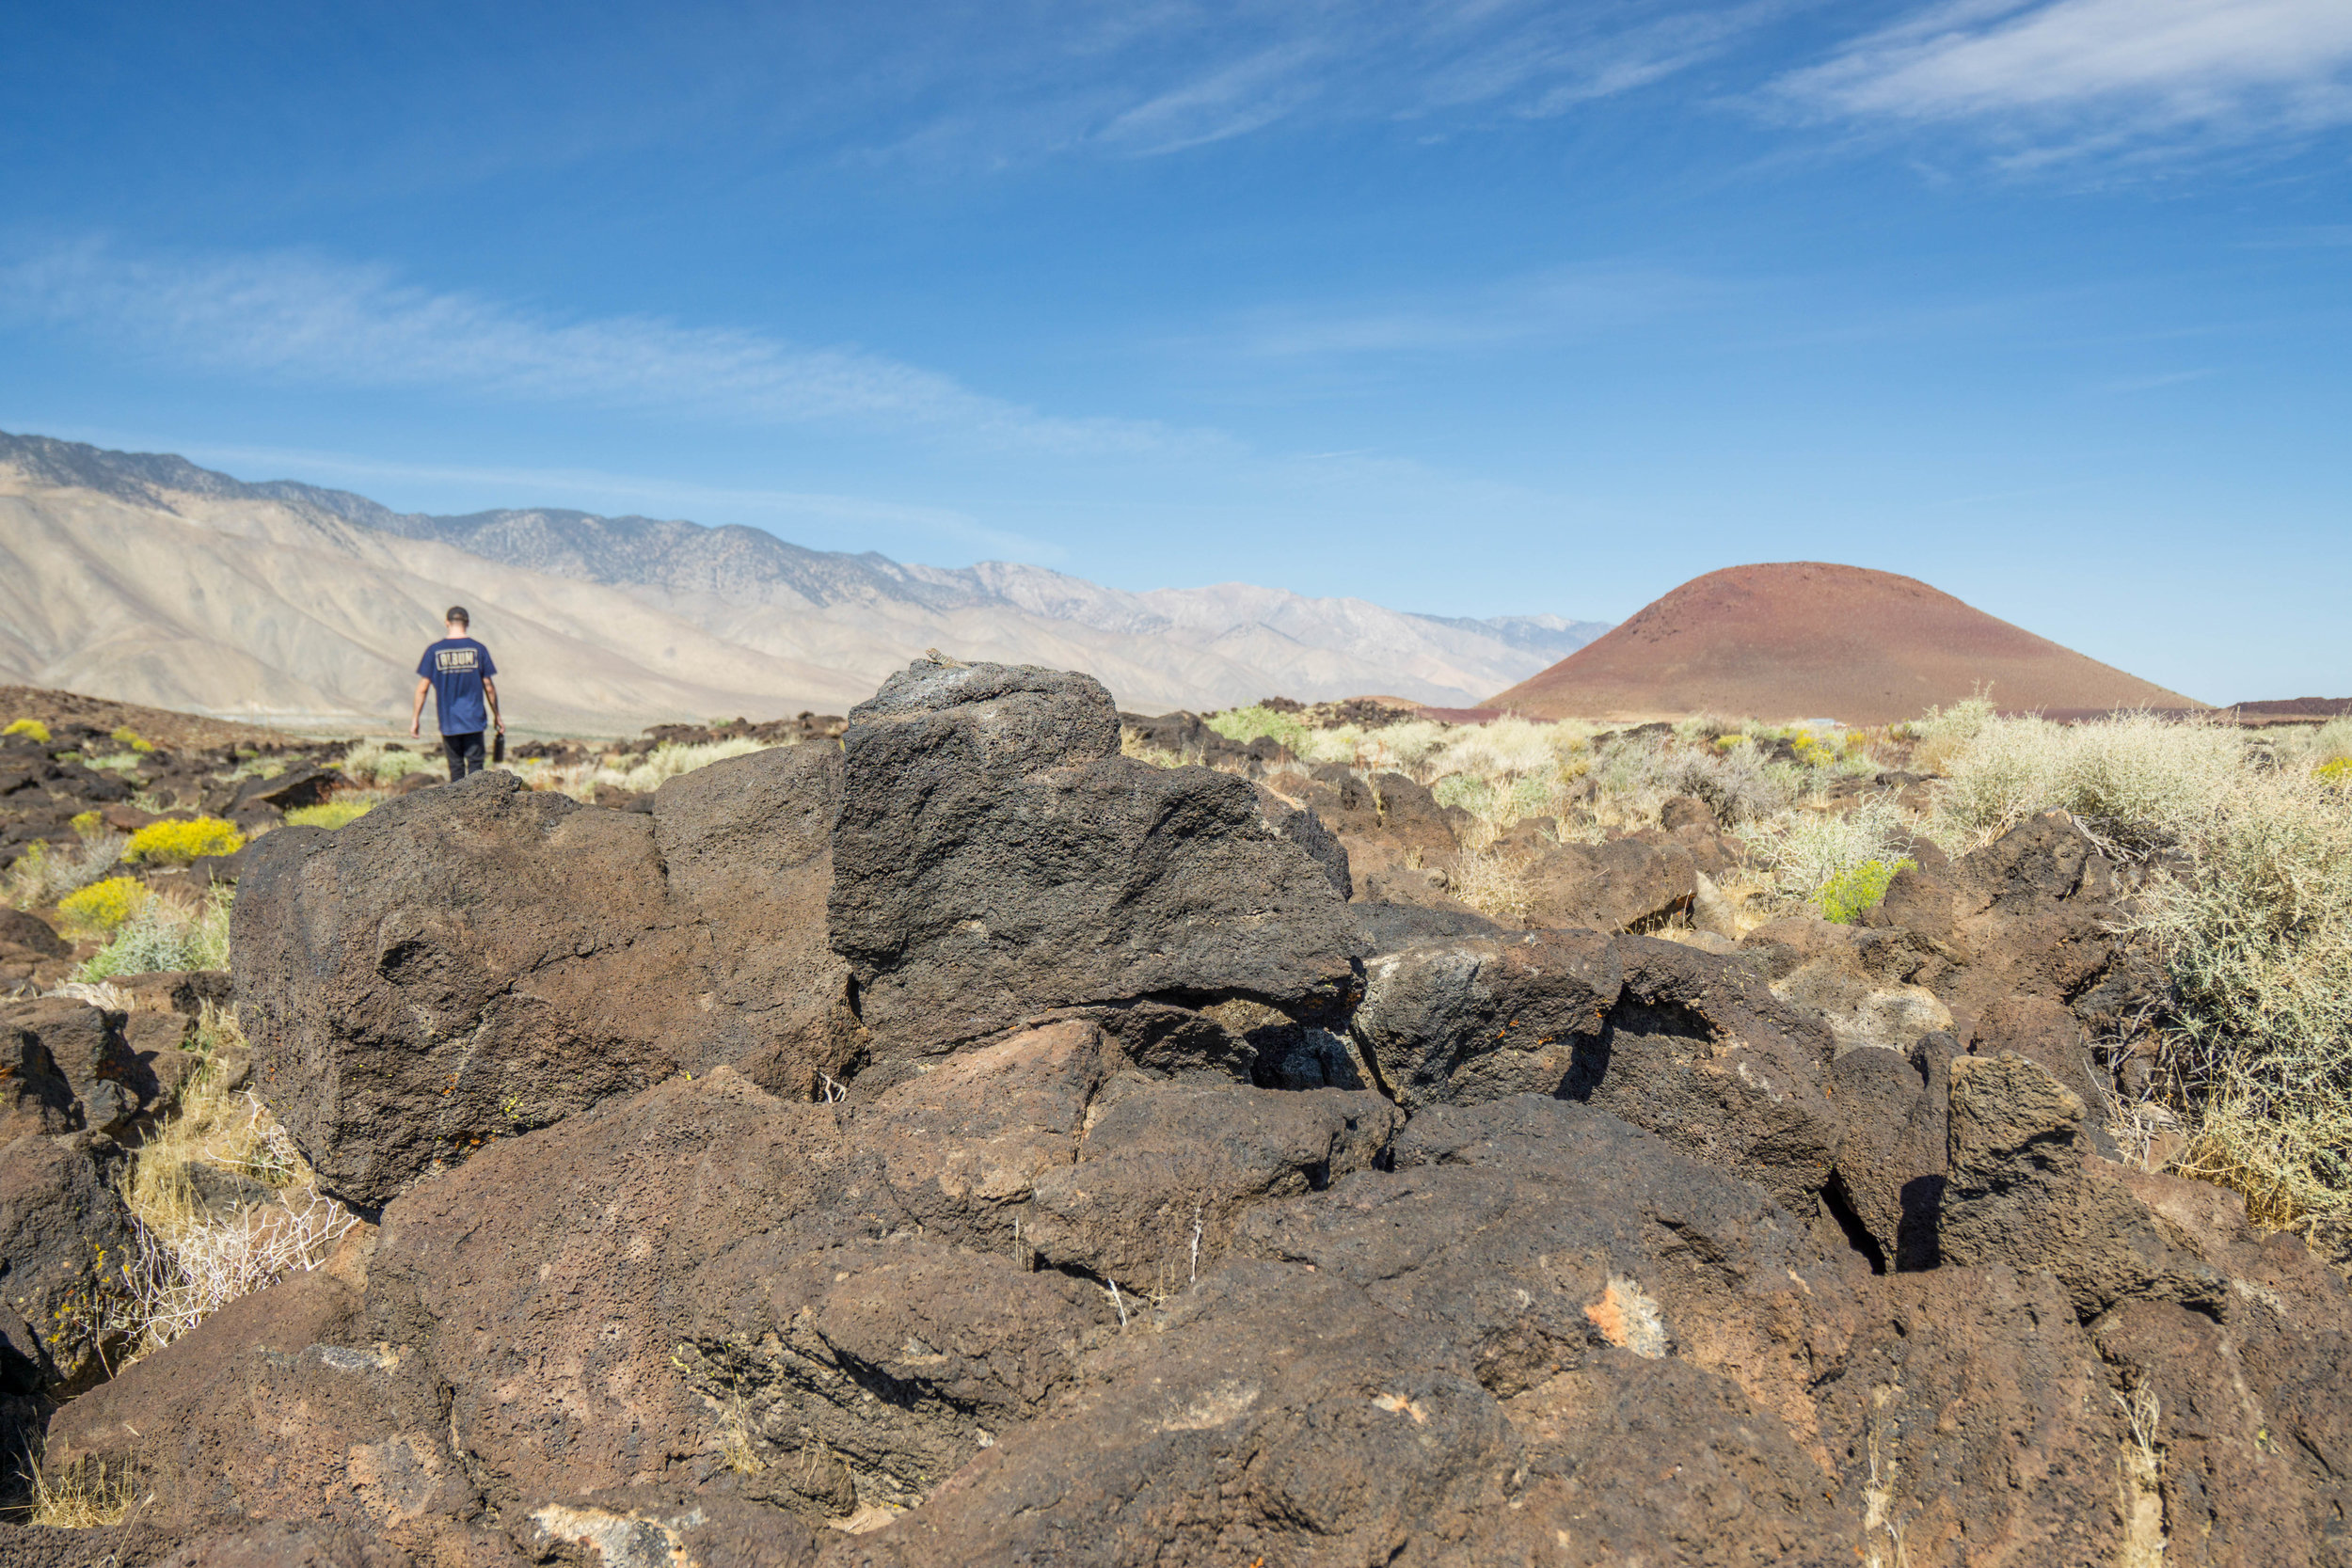 With the scarlet cinder cone looming in the distance, we wander through a field of scattered lava rock back to the car as yet another Misadventure comes to a close.